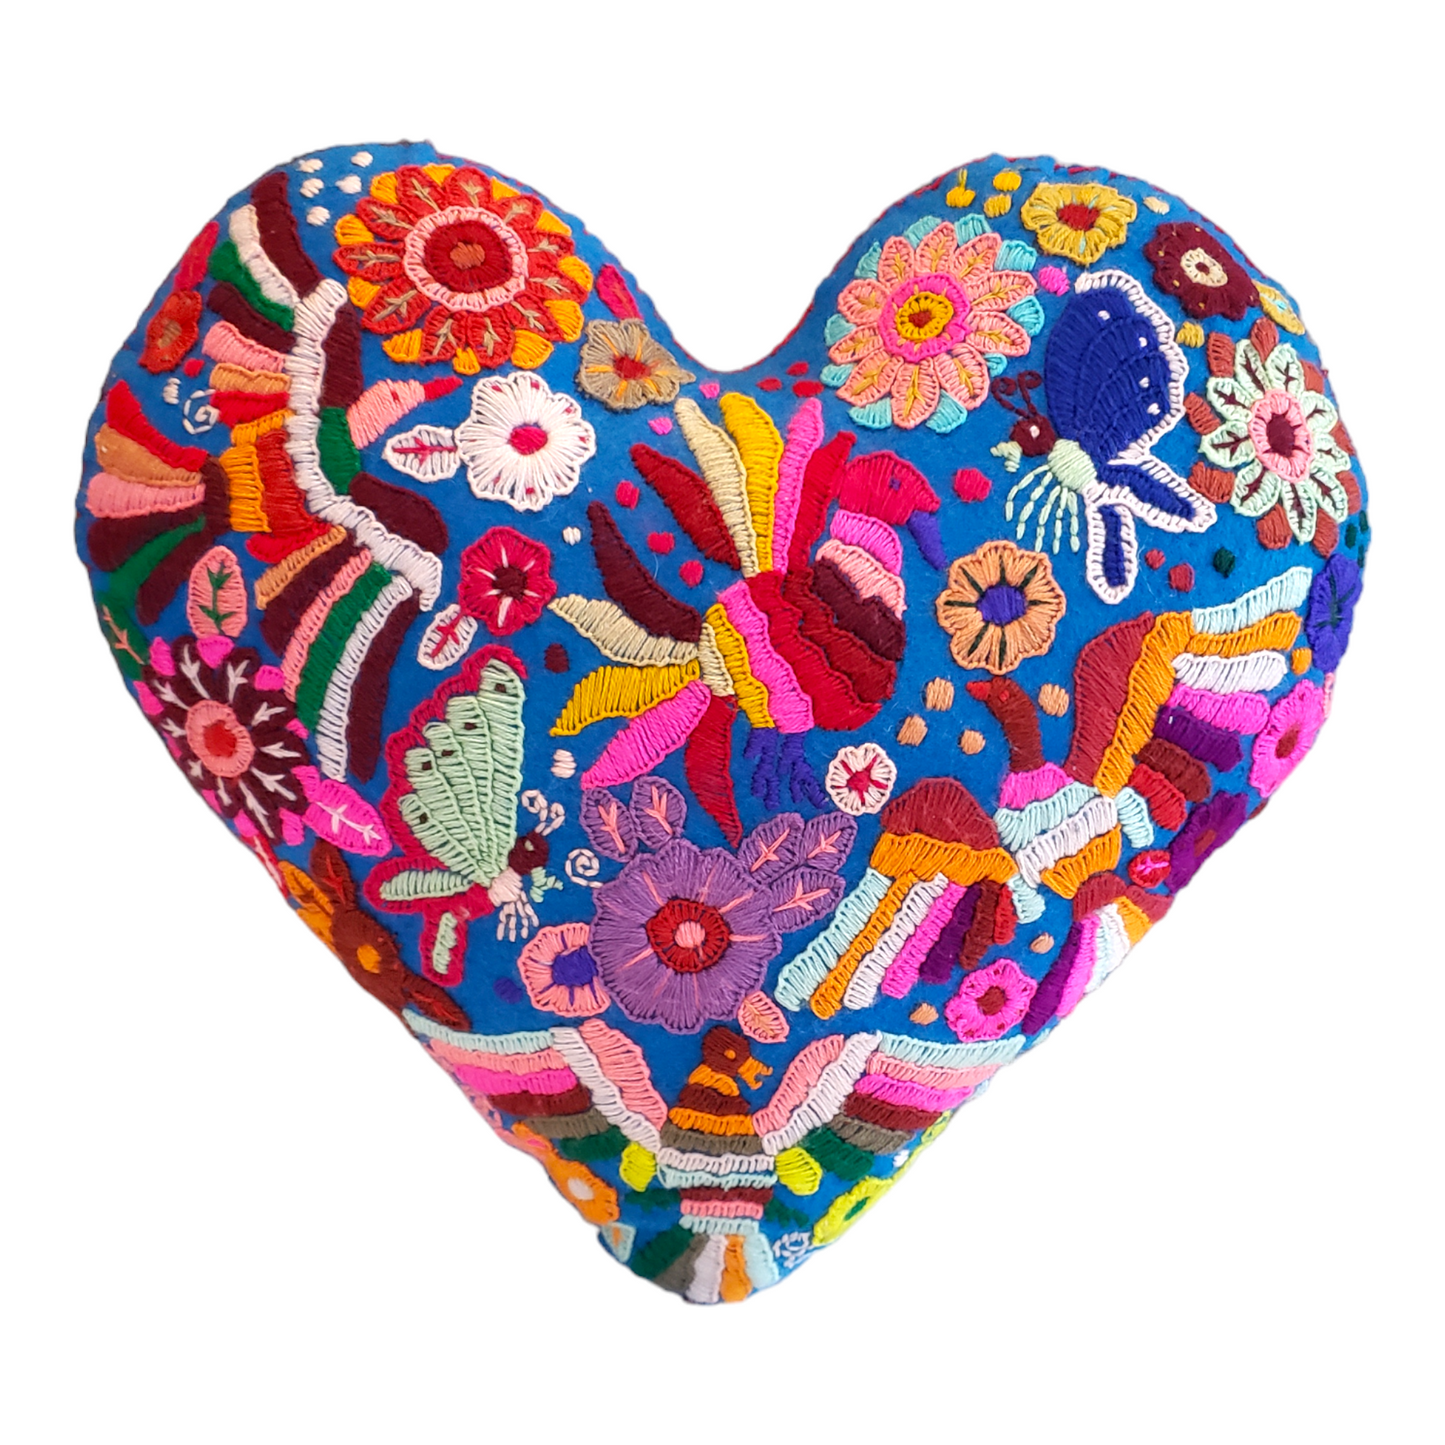 Large Heart Felt Embroidered Pillow